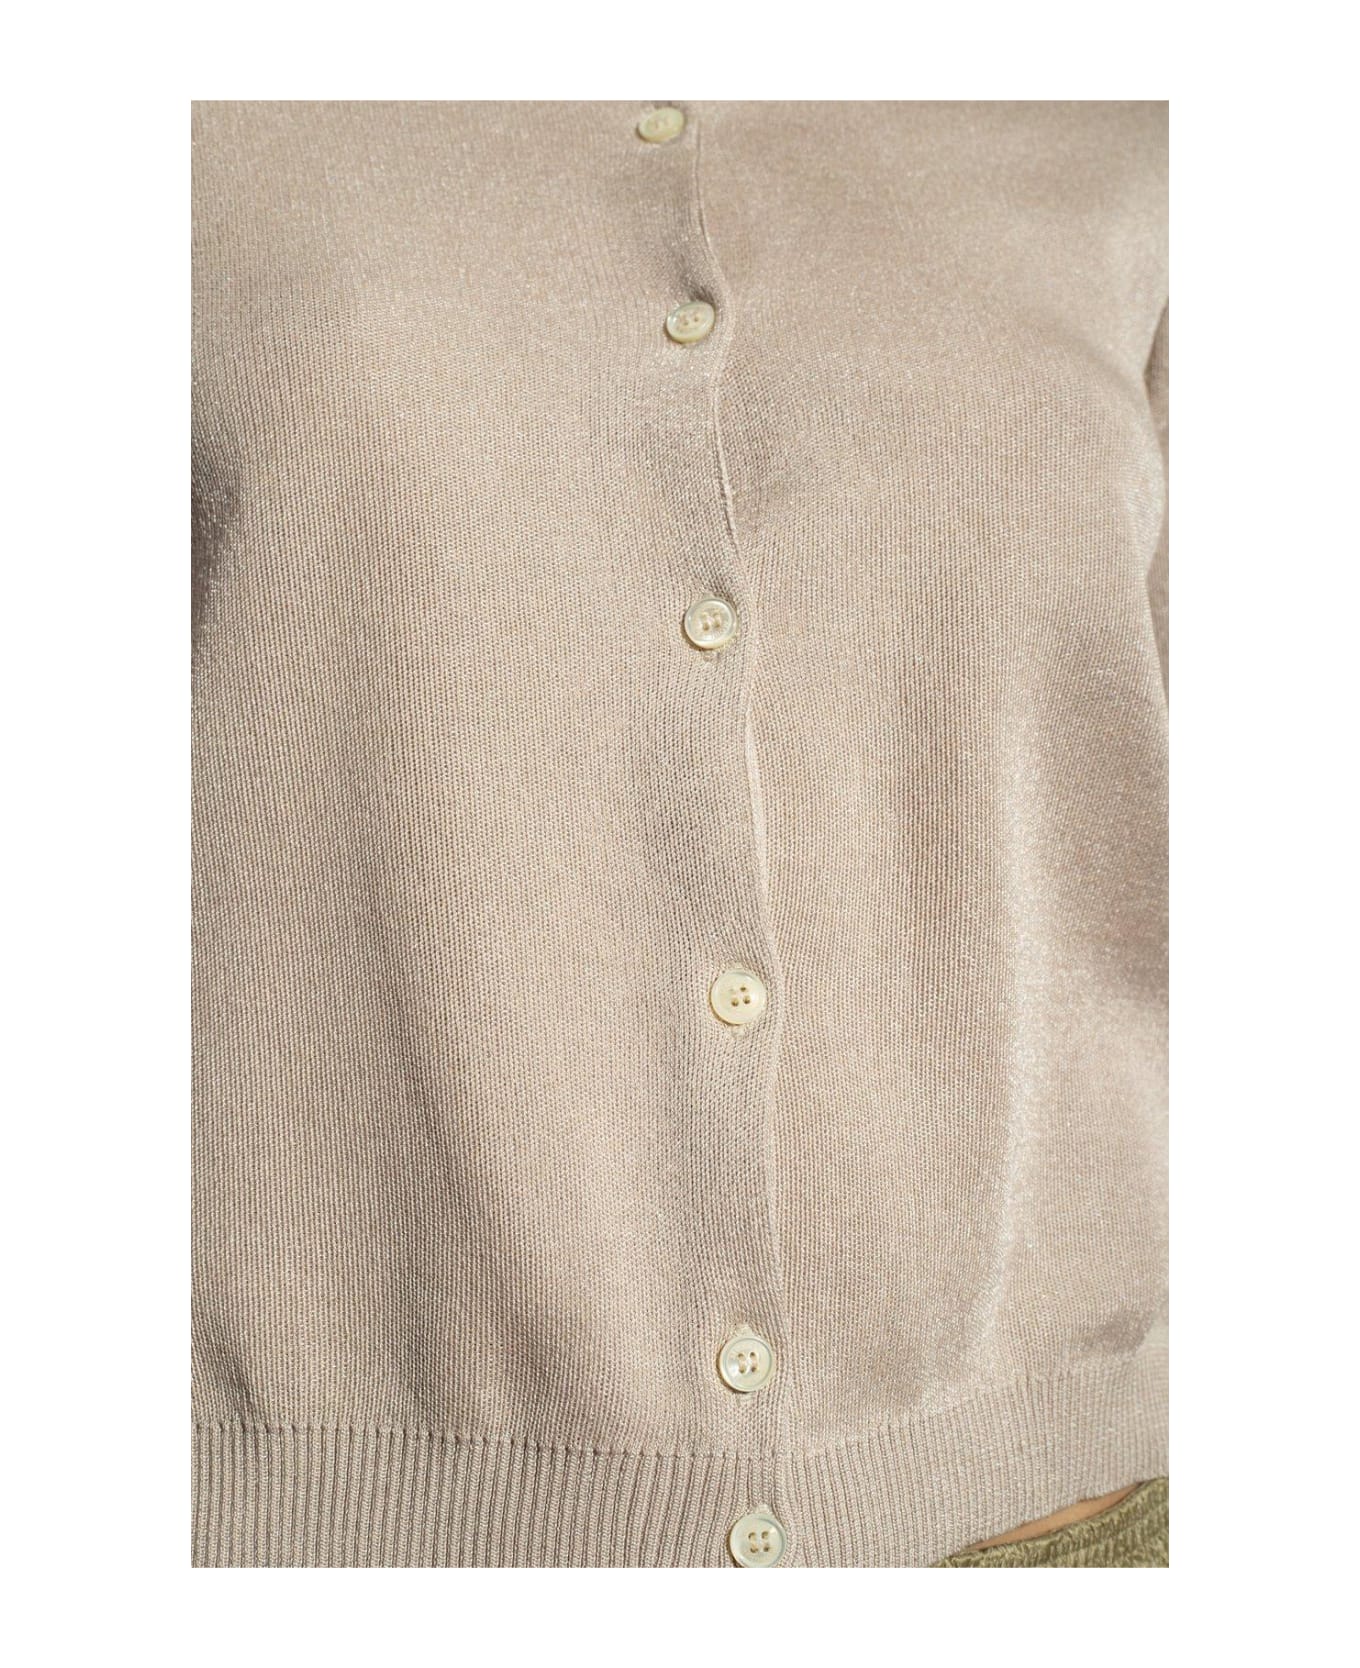 Moncler Glossy Button Up Cardigan - Beige